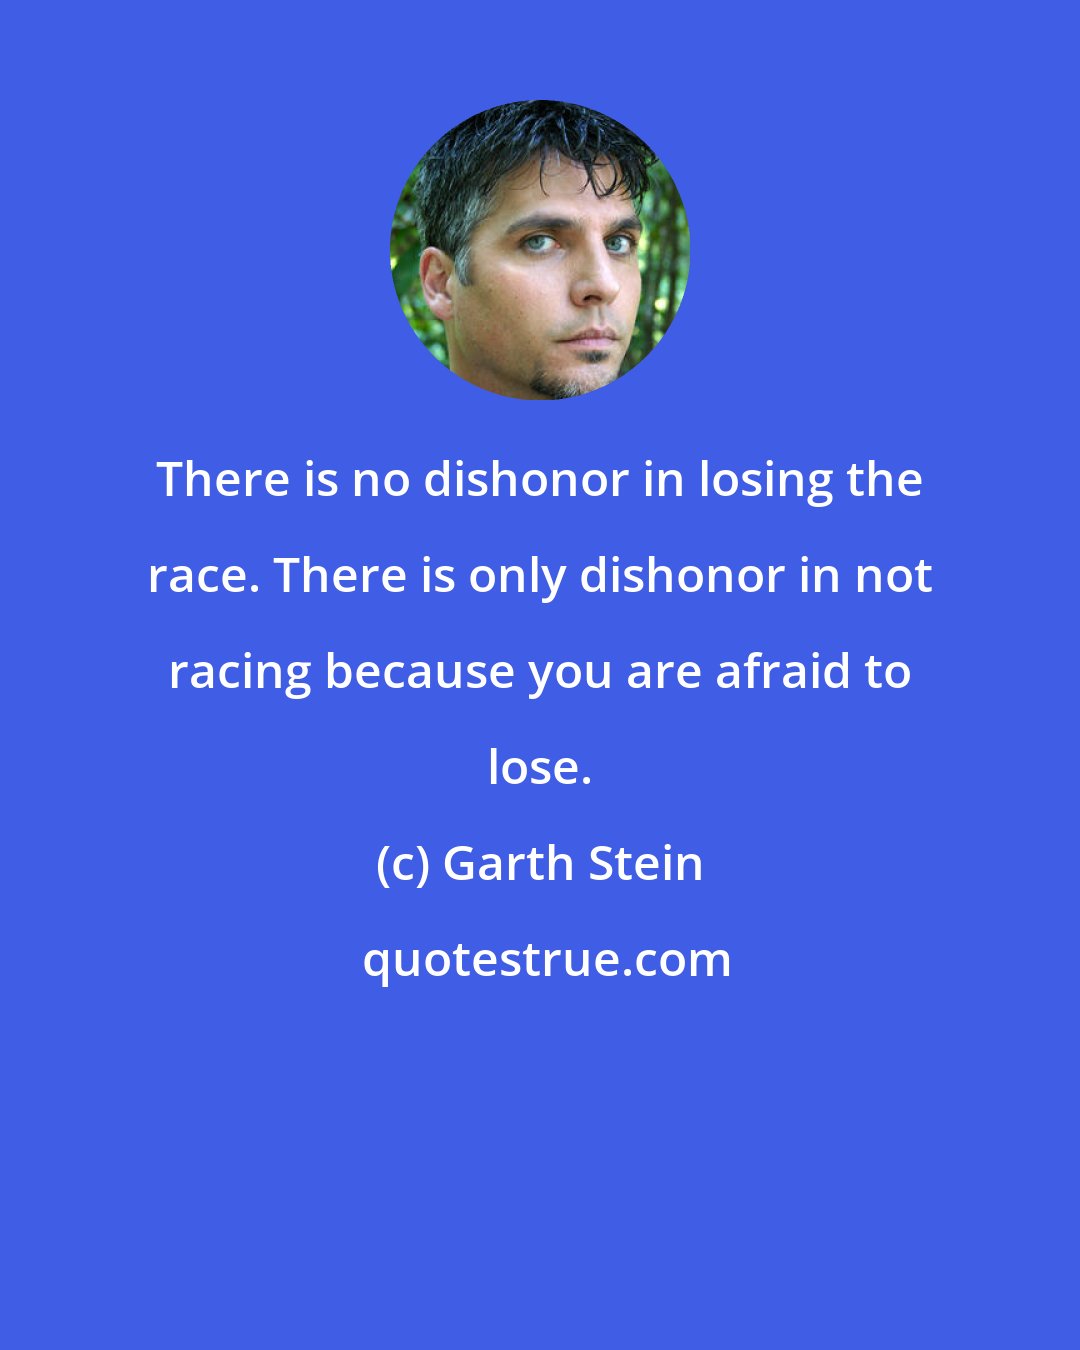 Garth Stein: There is no dishonor in losing the race. There is only dishonor in not racing because you are afraid to lose.